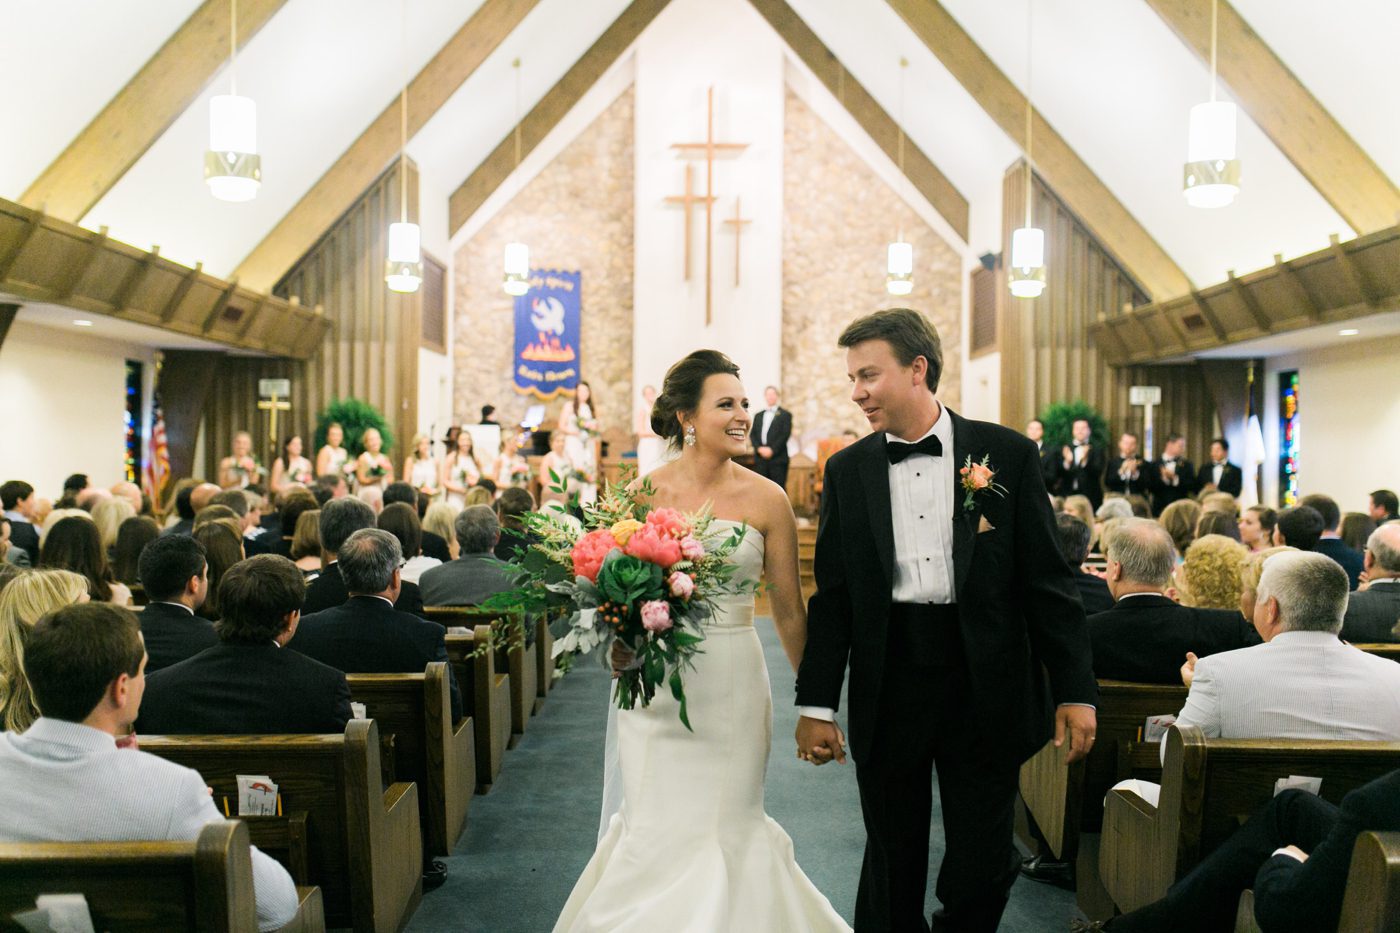 Bride and groom walking down the aisle together smiling. Photo by Charleston wedding photographer Catherine Ann Photography